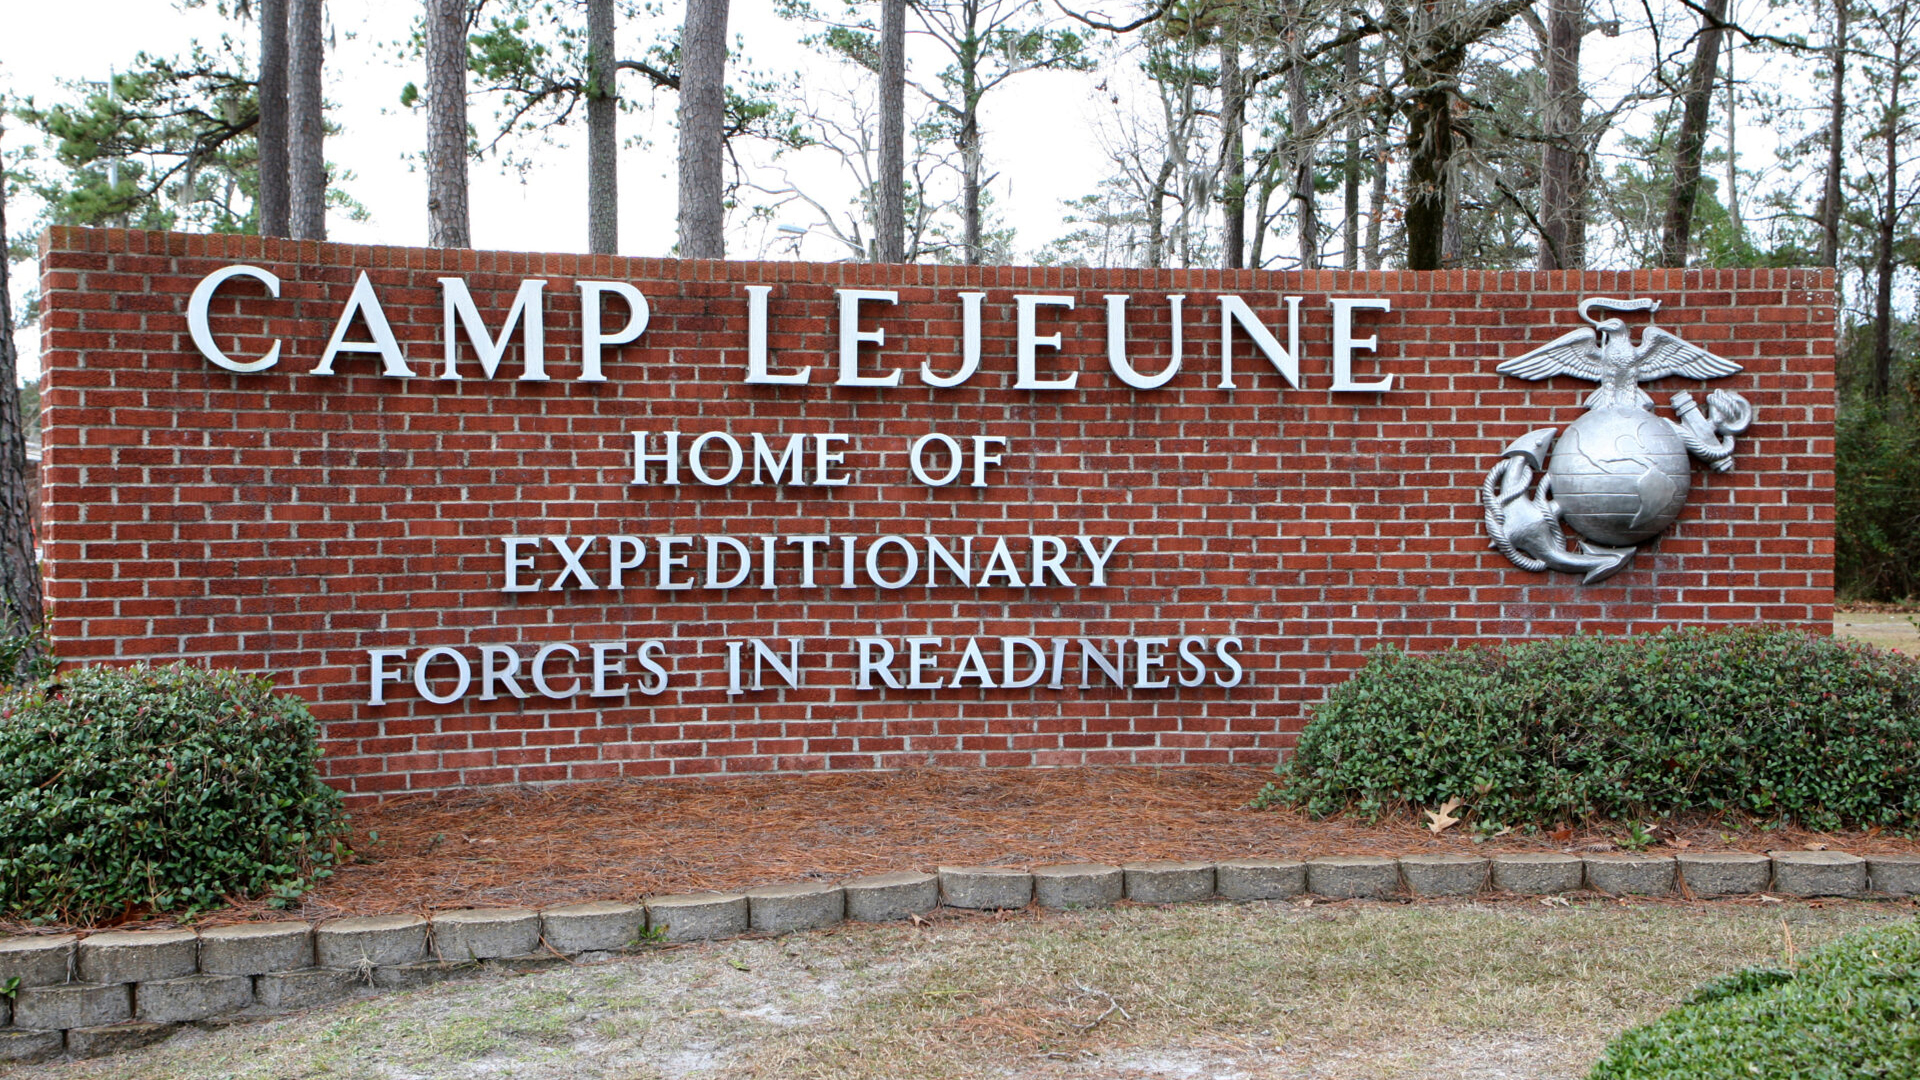 Compensation Offered, But Camp Lejeune Victims Demand Justice in Federal Court...